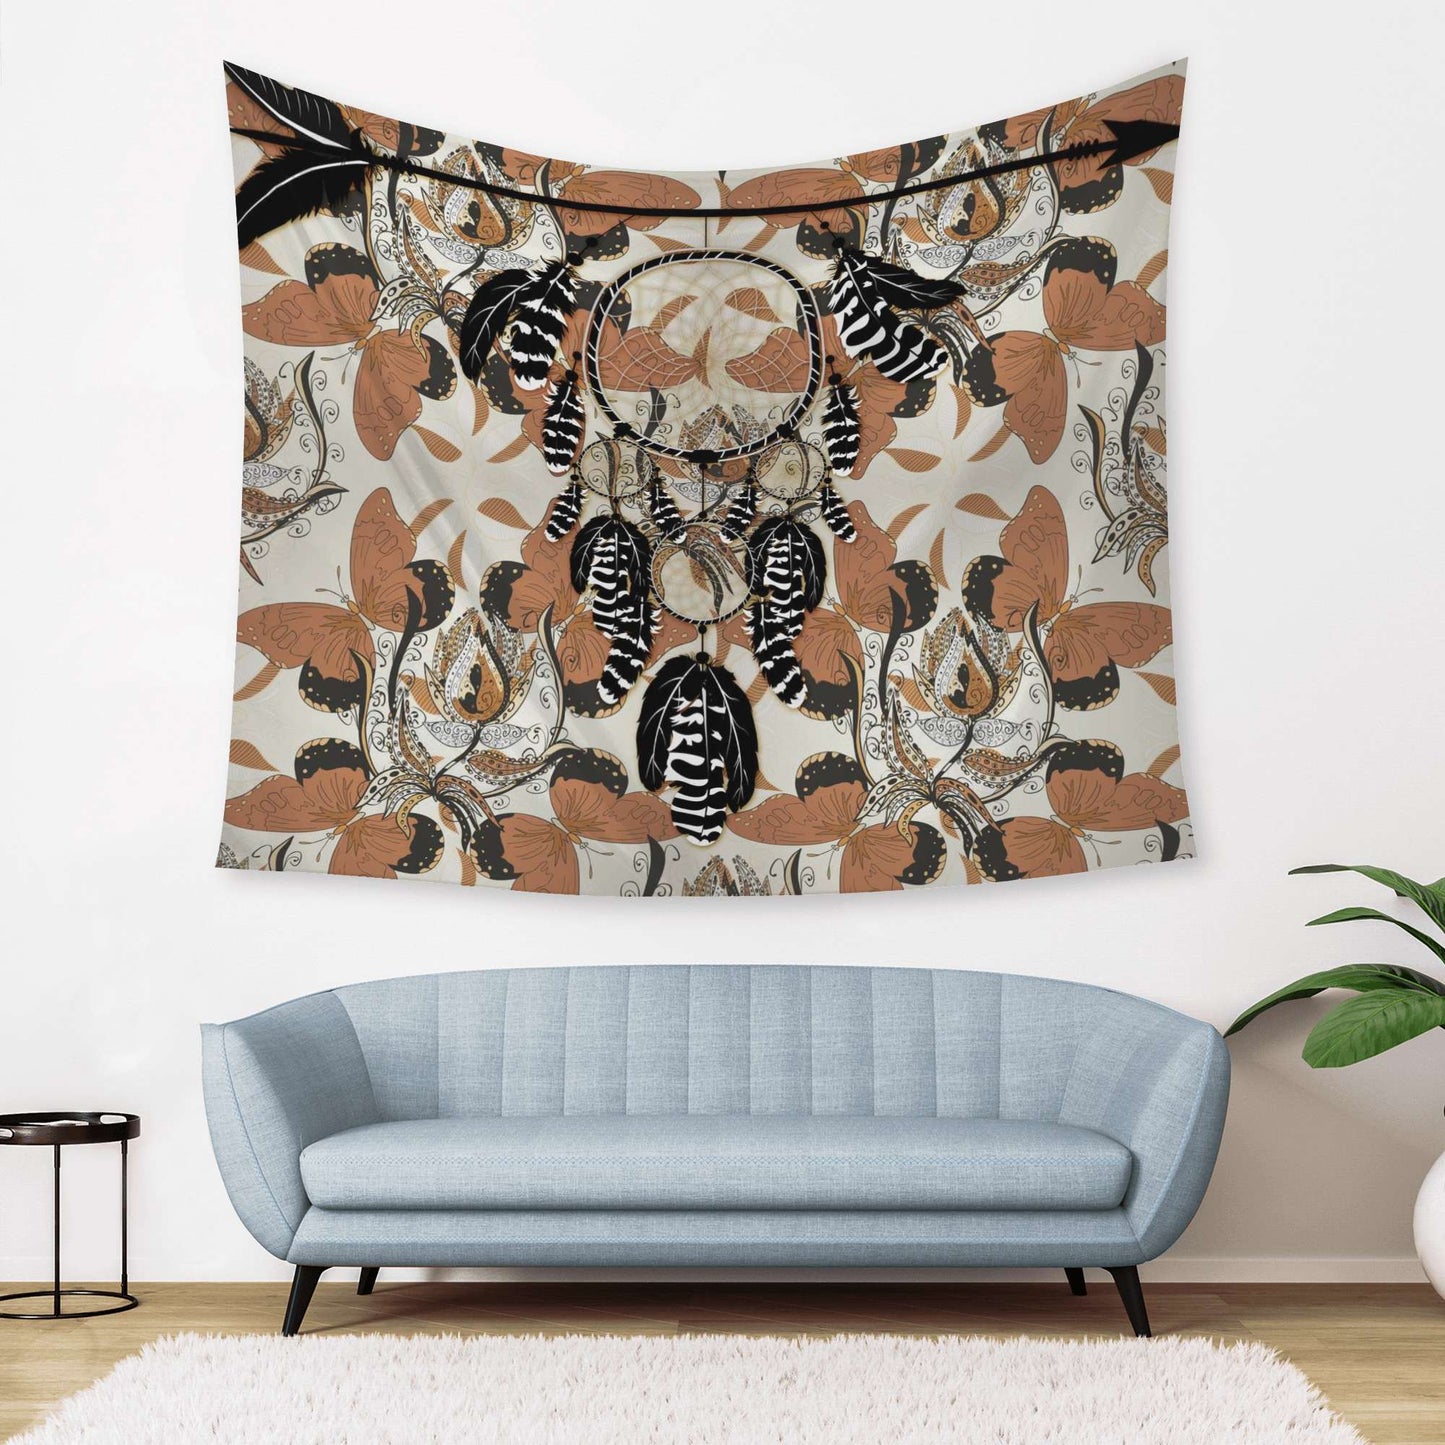 Keep The Dreams At Bay With This Beautiful Dream Catcher Tapestry